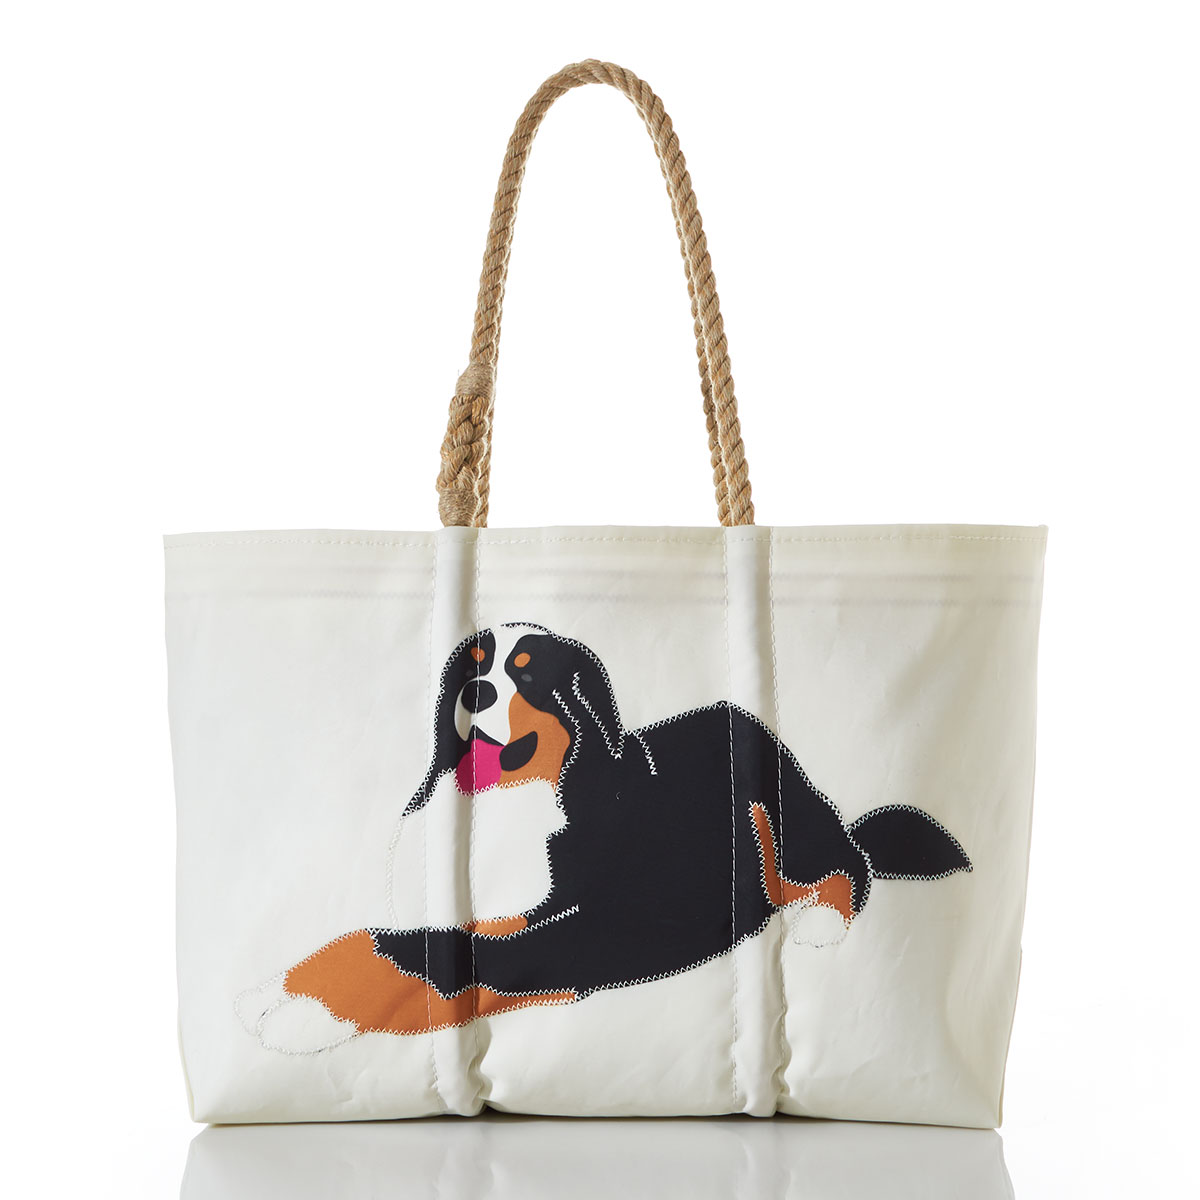 Bernese mountain dog printed on white recycled sail cloth tote with hemp rope handles